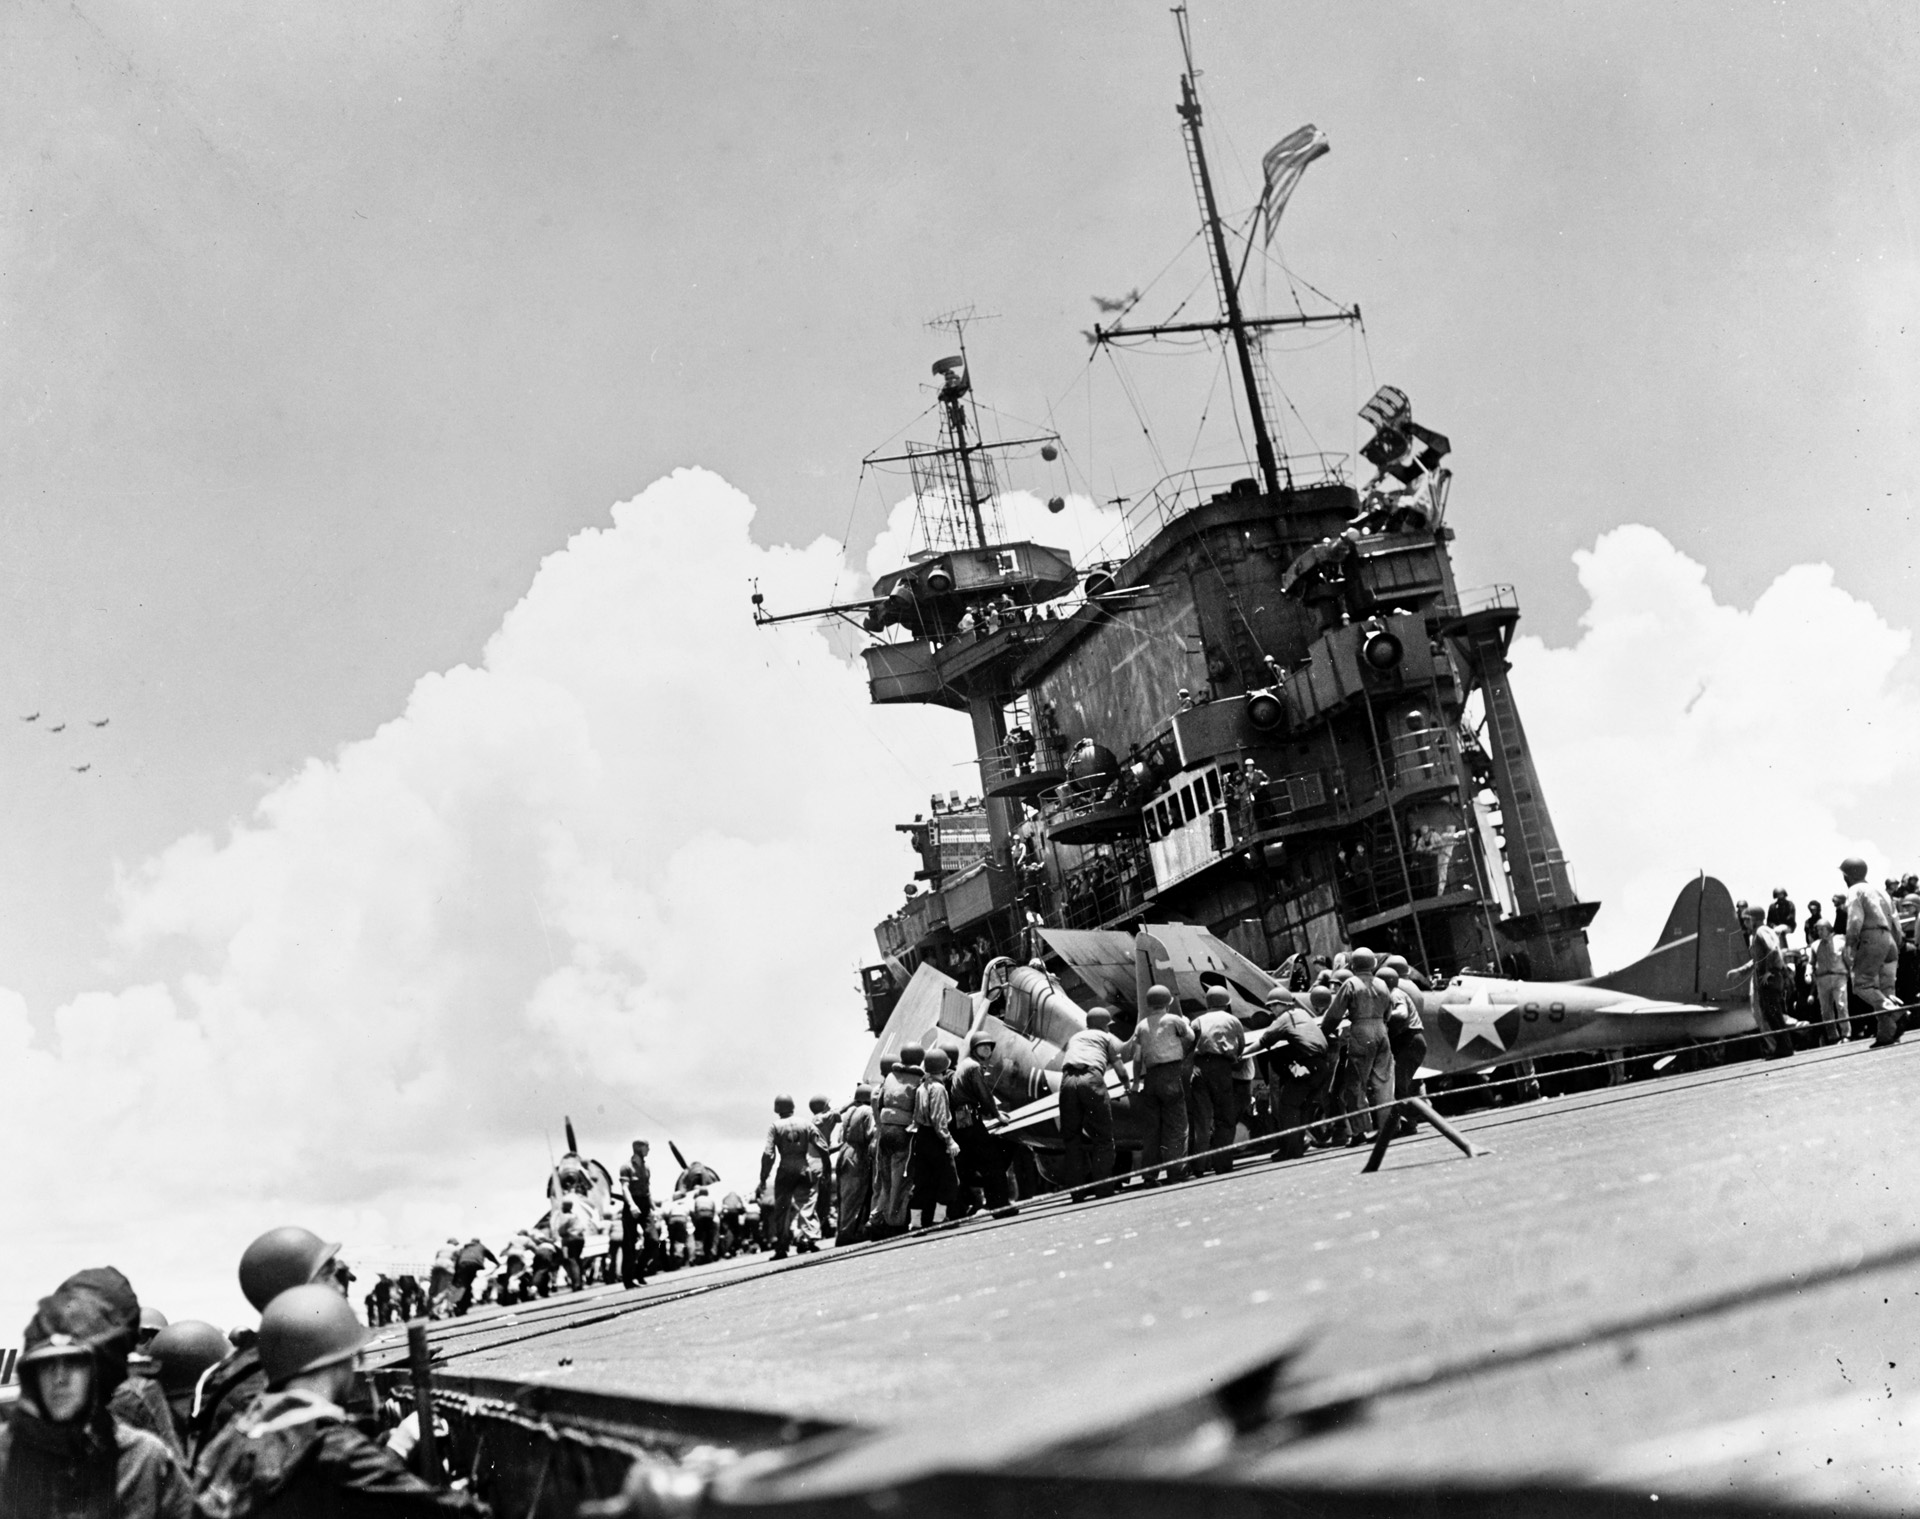 Plane-handling crews aboard USS Enterprise (CV-6) work to prepare an F4F Wildcat for flight during the Battle of the Santa Cruz Islands, October 26, 1942. The “Big E” would survive the war. Although the battle was a short-term victory for the Japanese in terms of ships sunk and damaged, Japan’s loss of many irreplaceable aircrews—particularly flight leaders—proved to be a long-term strategic advantage for the Allies in the Pacific.